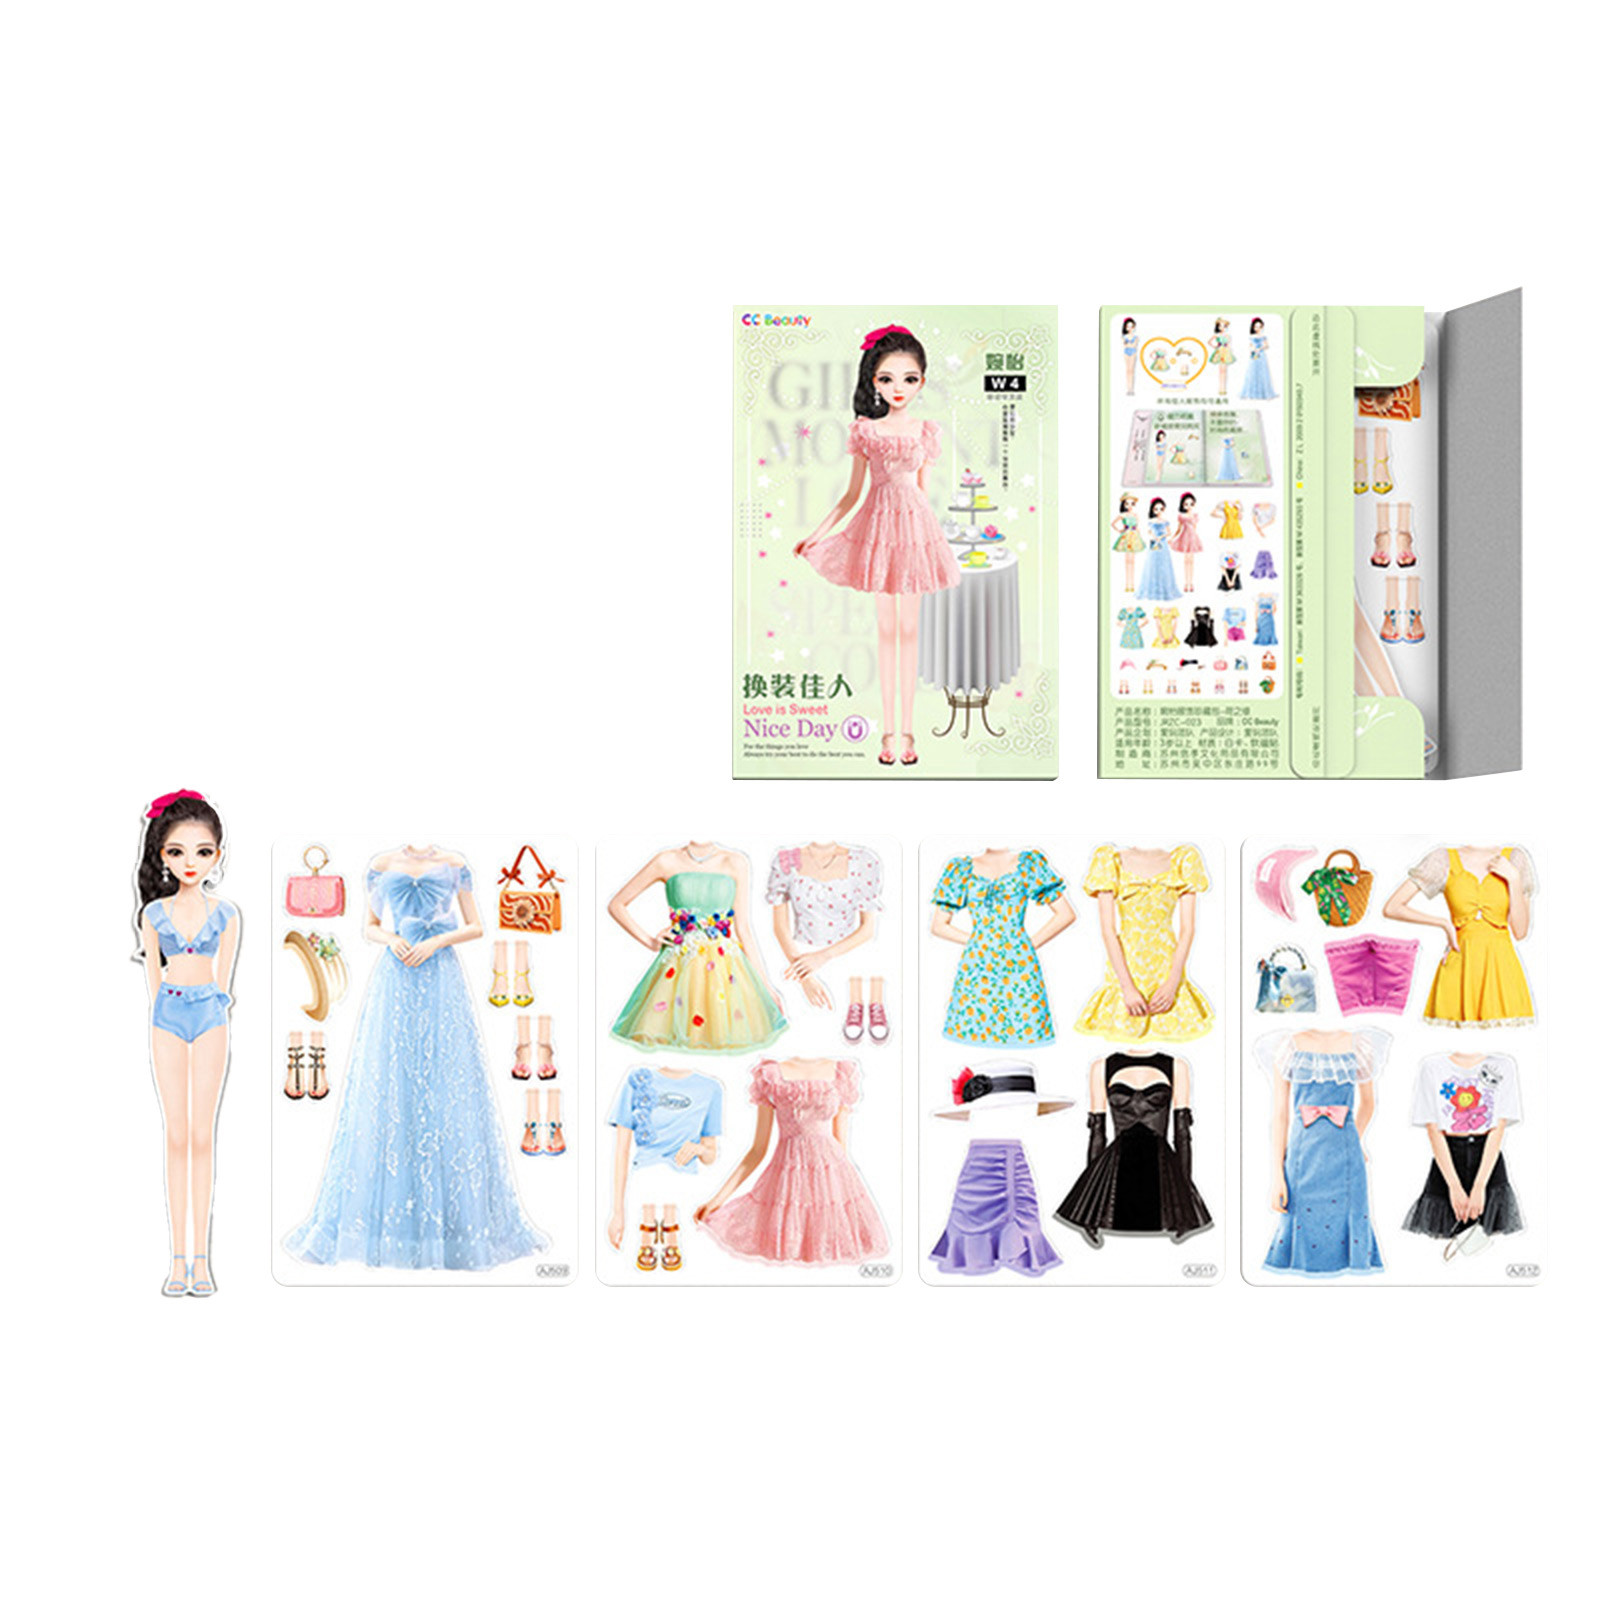 Loyerfyivos Magnetic Princess Dress Up Paper Doll Pretend Play Game, Travel Toys Car Road Trip,Magnet Clothes Puzzles for Kids Toddler Girls,Preschool Learning Created Imagine Set Birthday Gift - image 3 of 5